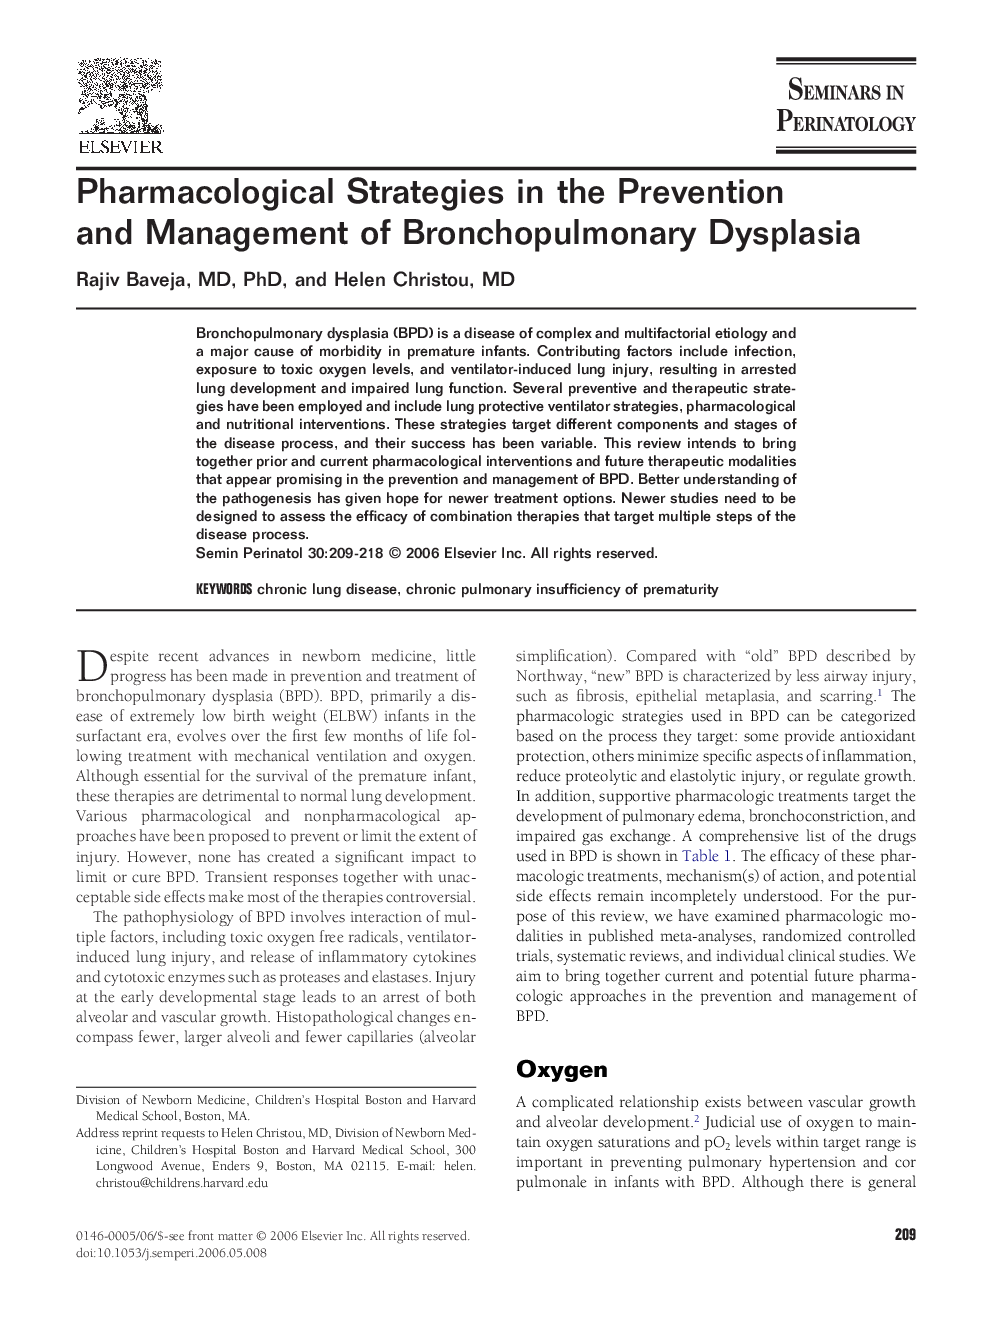 Pharmacological Strategies in the Prevention and Management of Bronchopulmonary Dysplasia